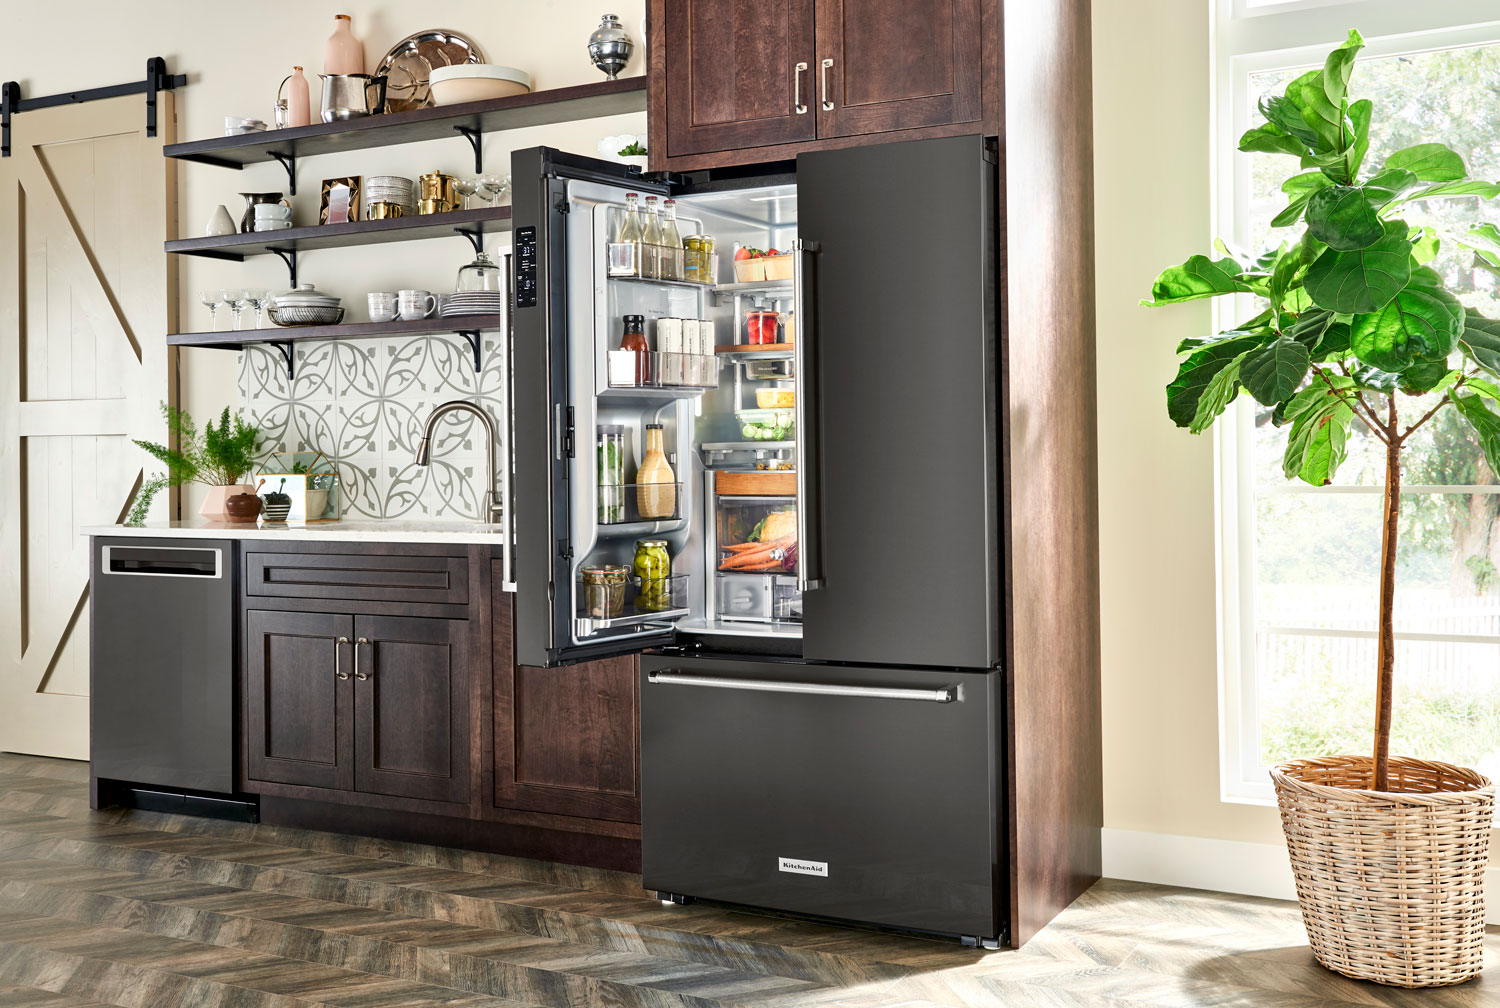 A KitchenAid® refrigerator with French doors.